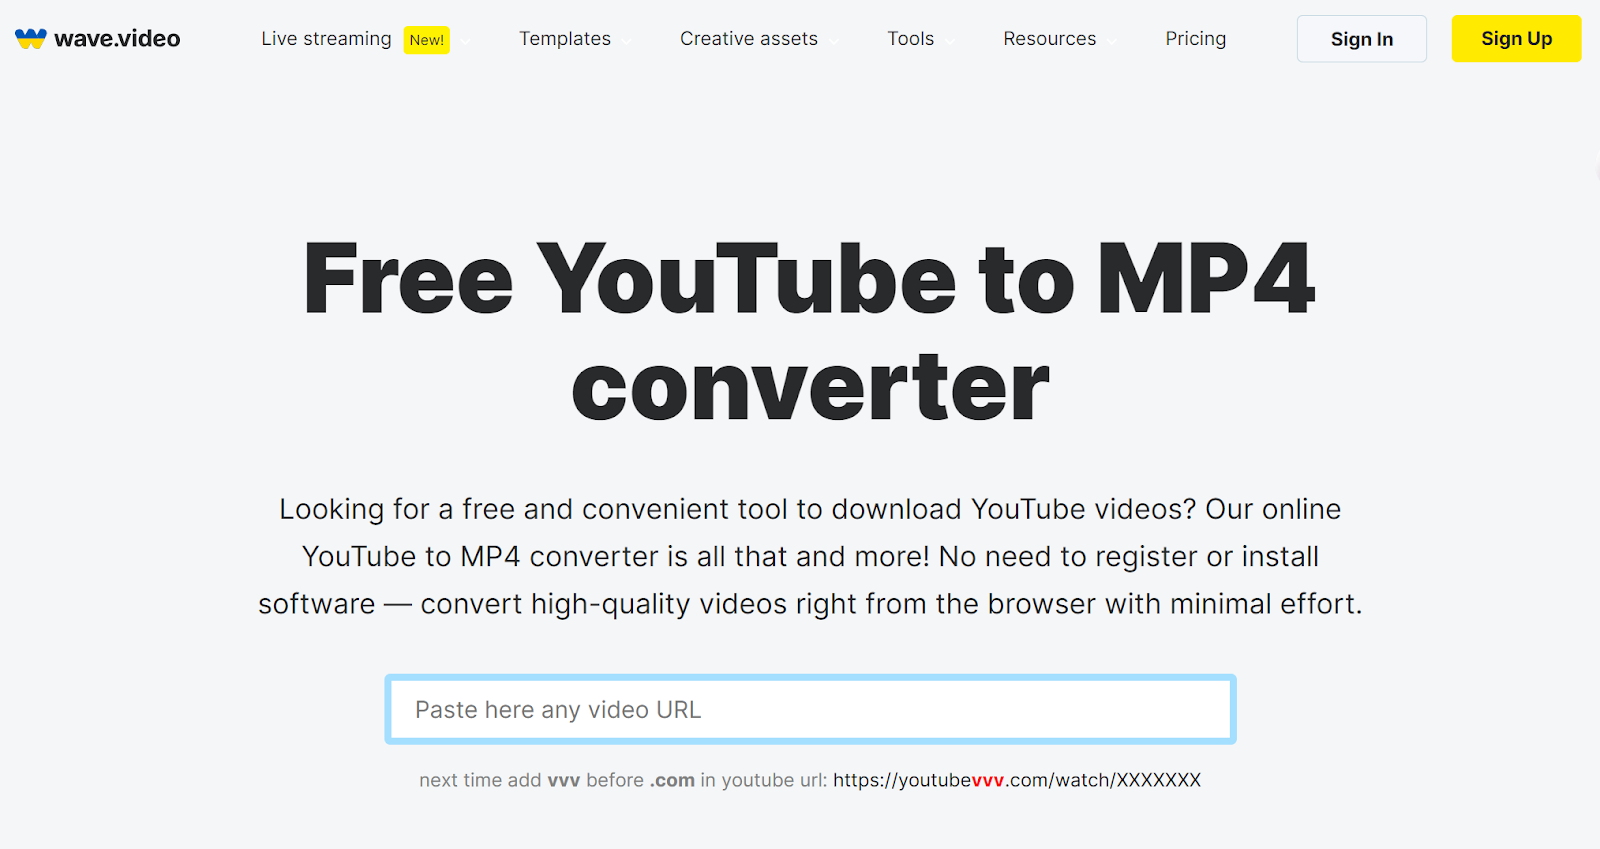 Top free YouTube to MP4 Converter tools - Wave.video